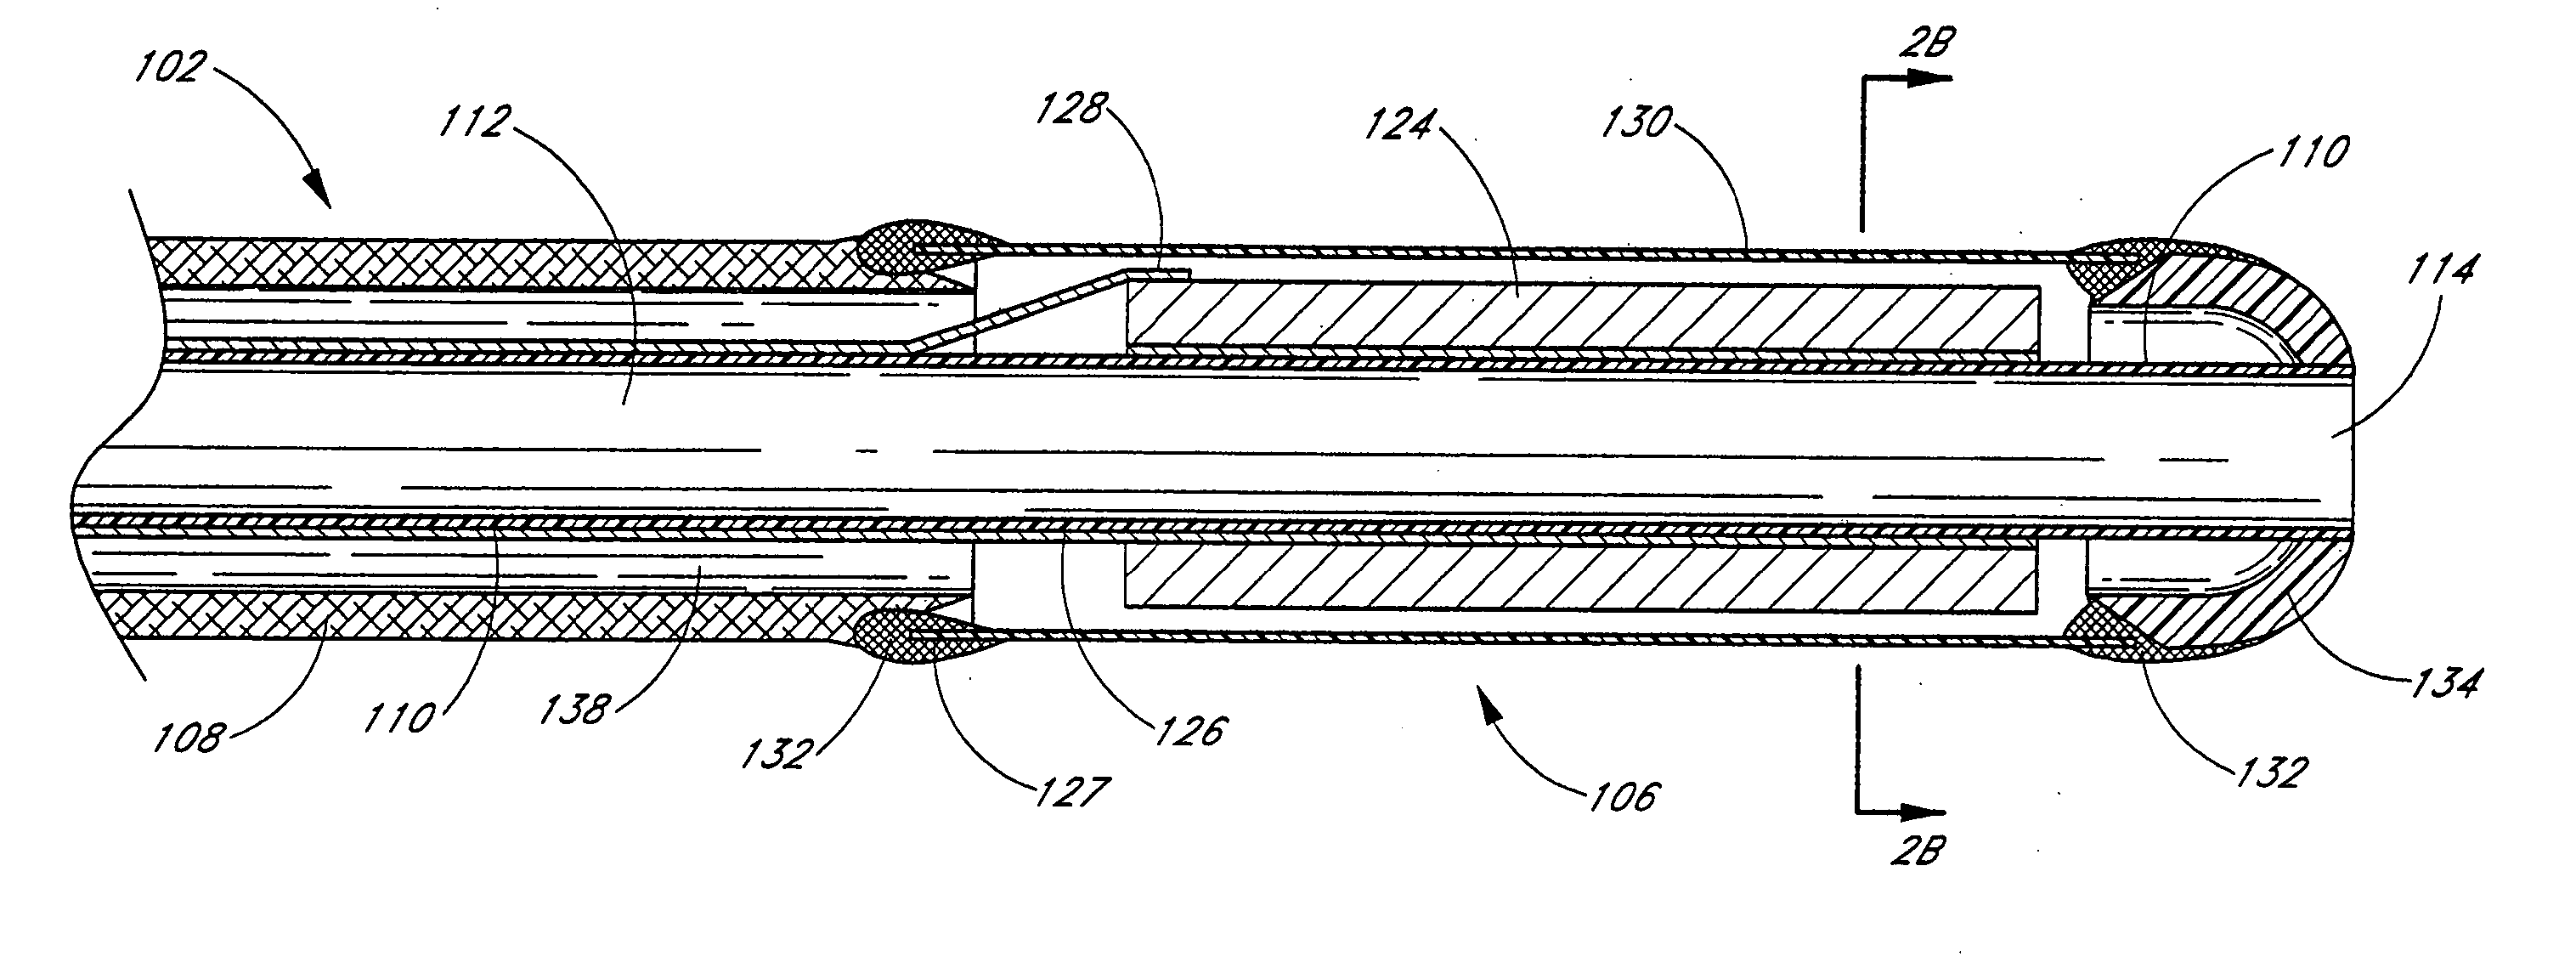 Ultrasound catheter with embedded conductors